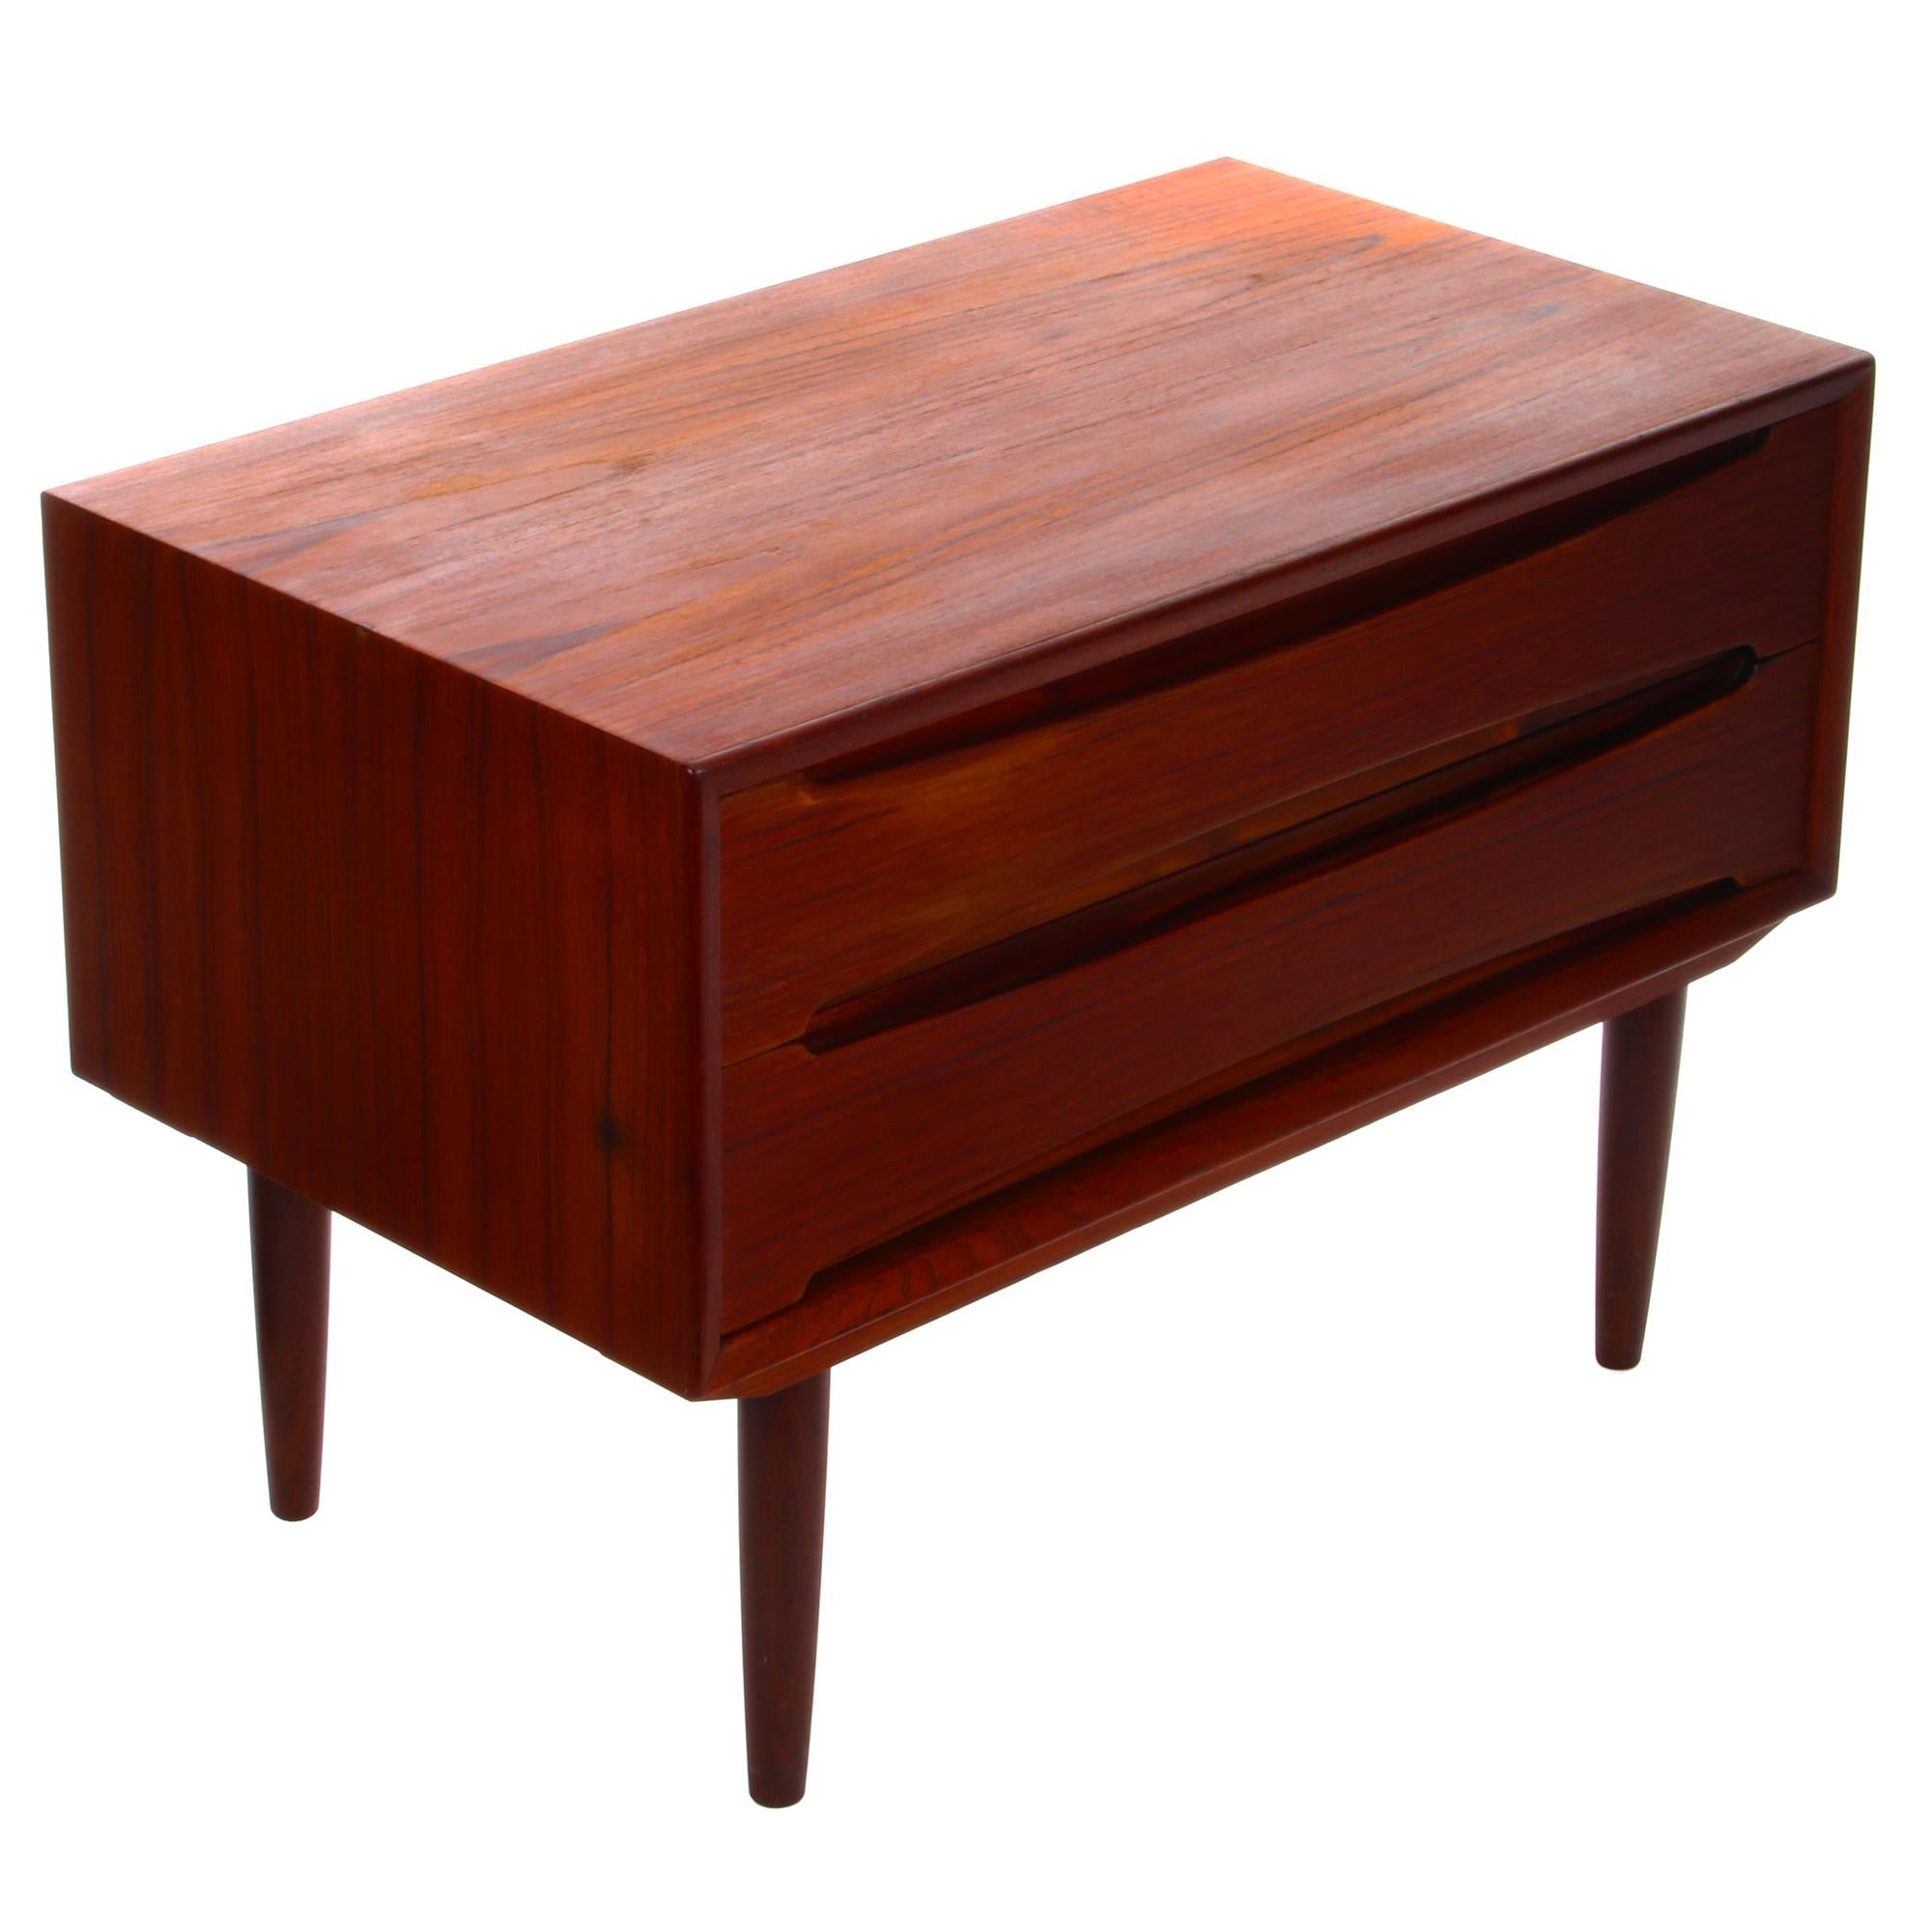 Teak dresser - 1960s Danish chest of drawers with tapered legs by Skovby Møbelfabrik. Beautiful Danish Modern dresser in very good vintage condition.

A Classic mid-century piece crafted in teak with a rectangular shaped body carried by four